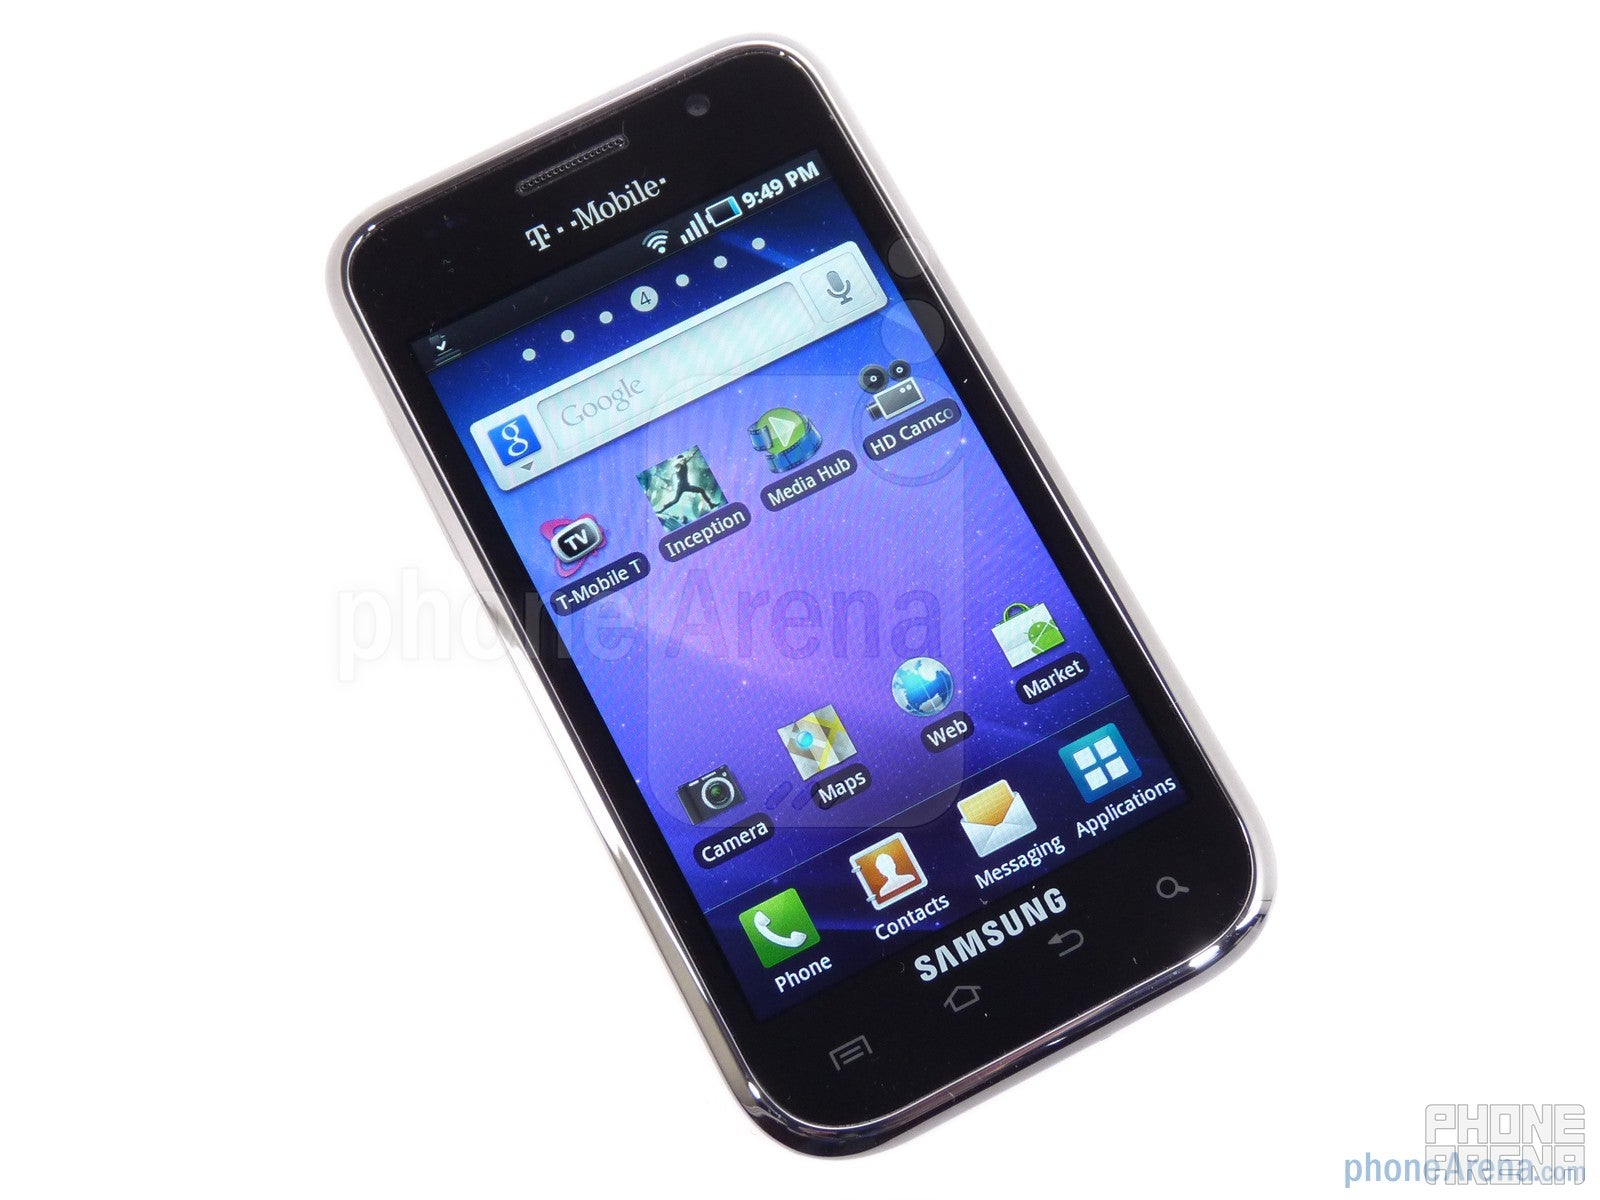 Samsung Galaxy S 4G Review